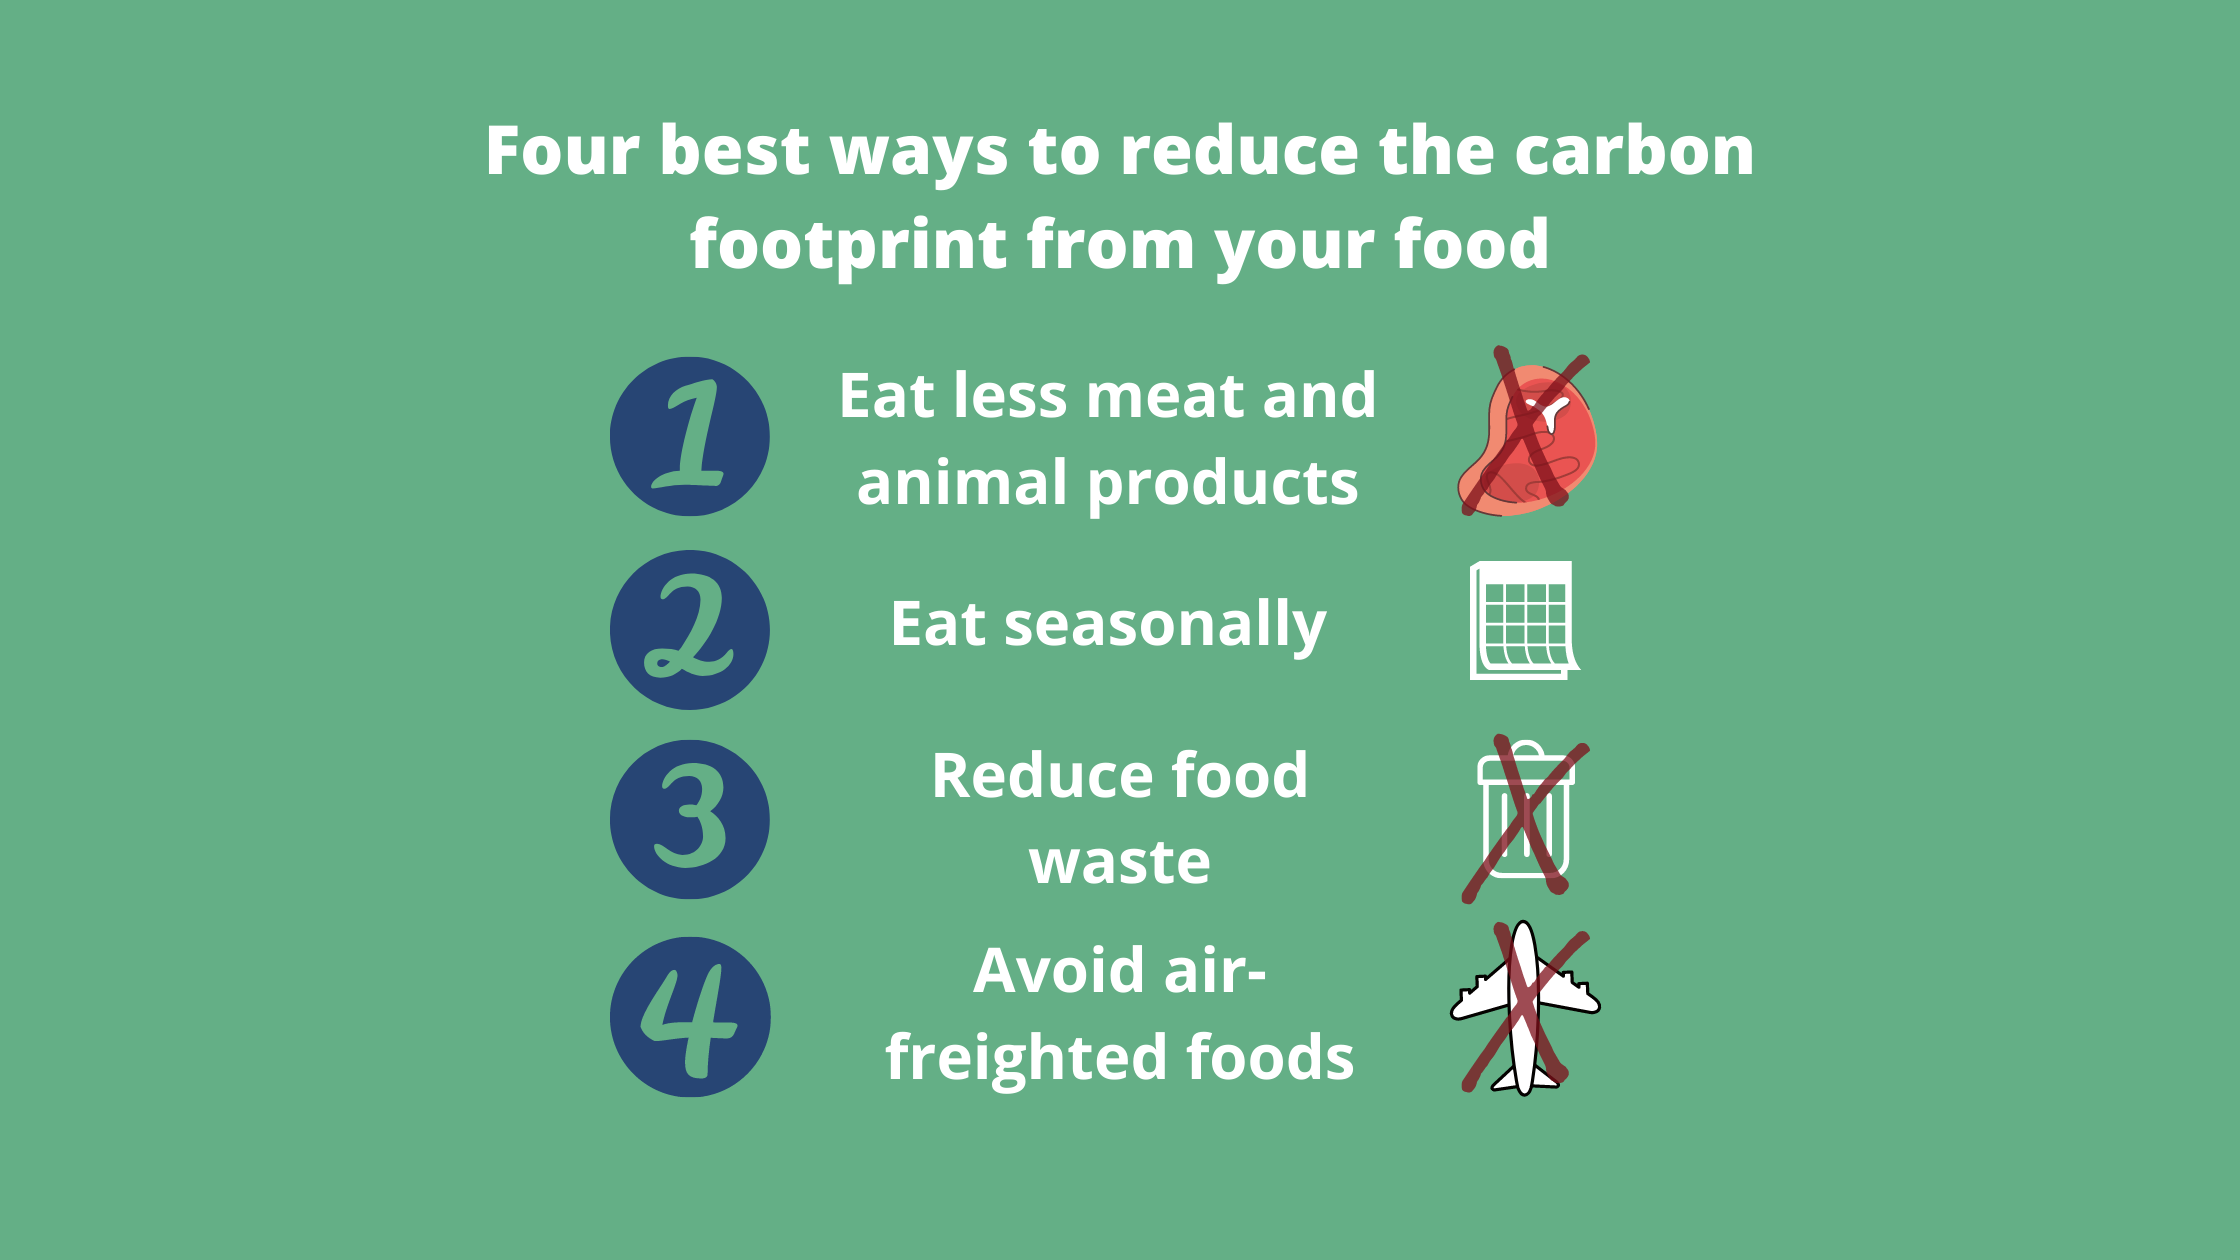 How to reduce the carbon footprint from your food